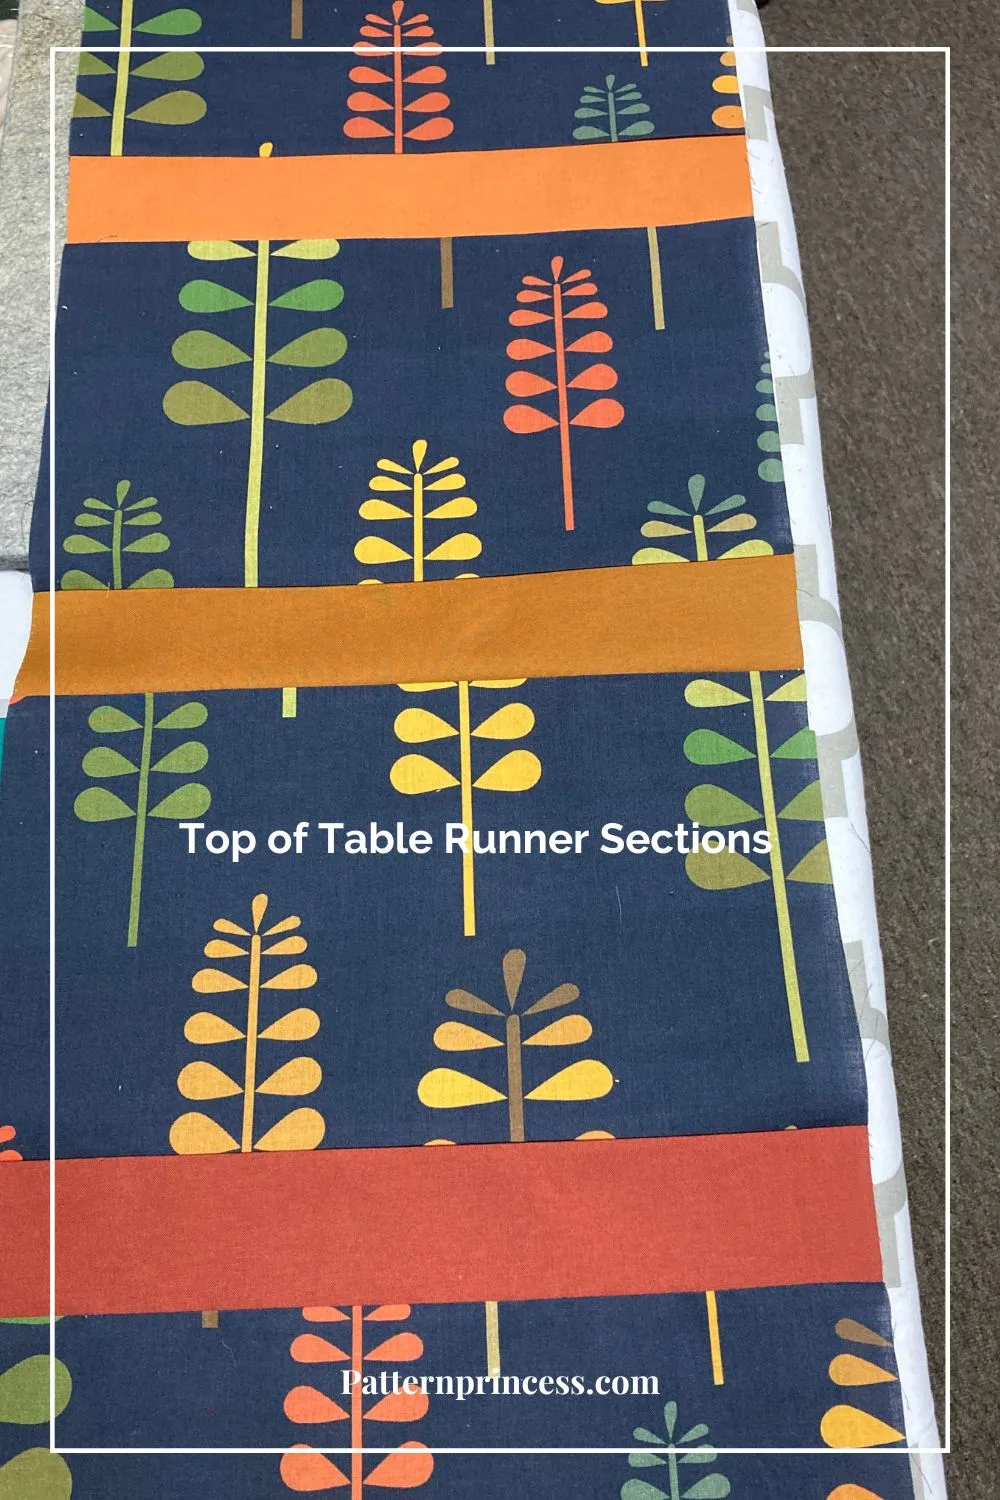 Top of Table Runner Sections